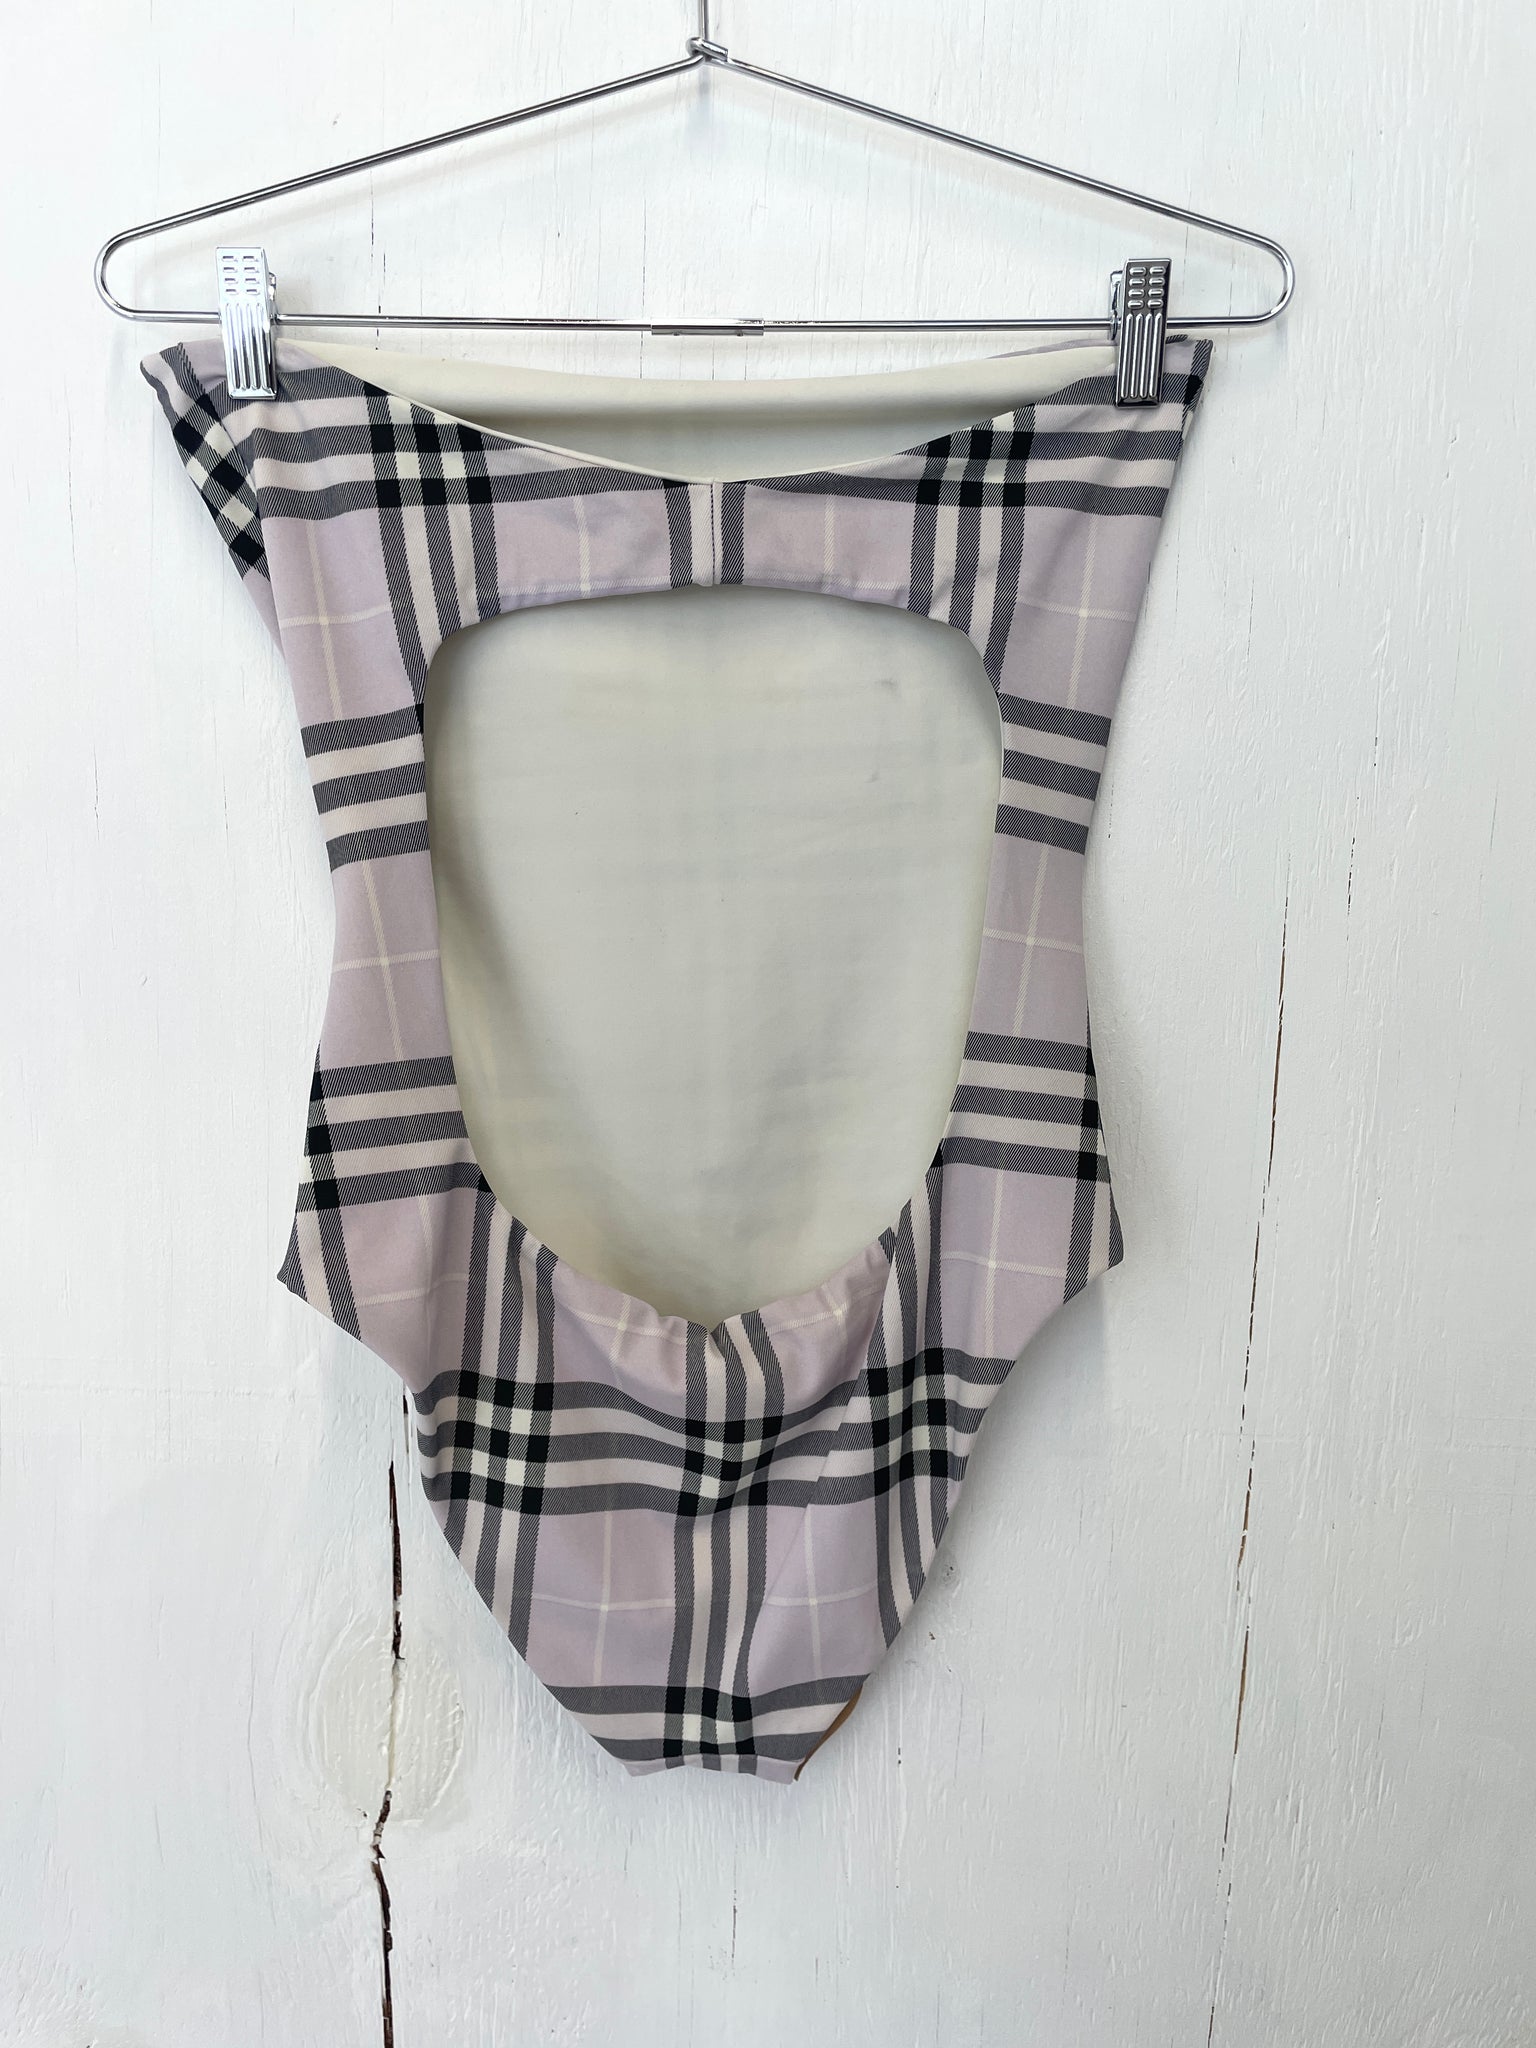 Burberry Lavender Check Swimsuit